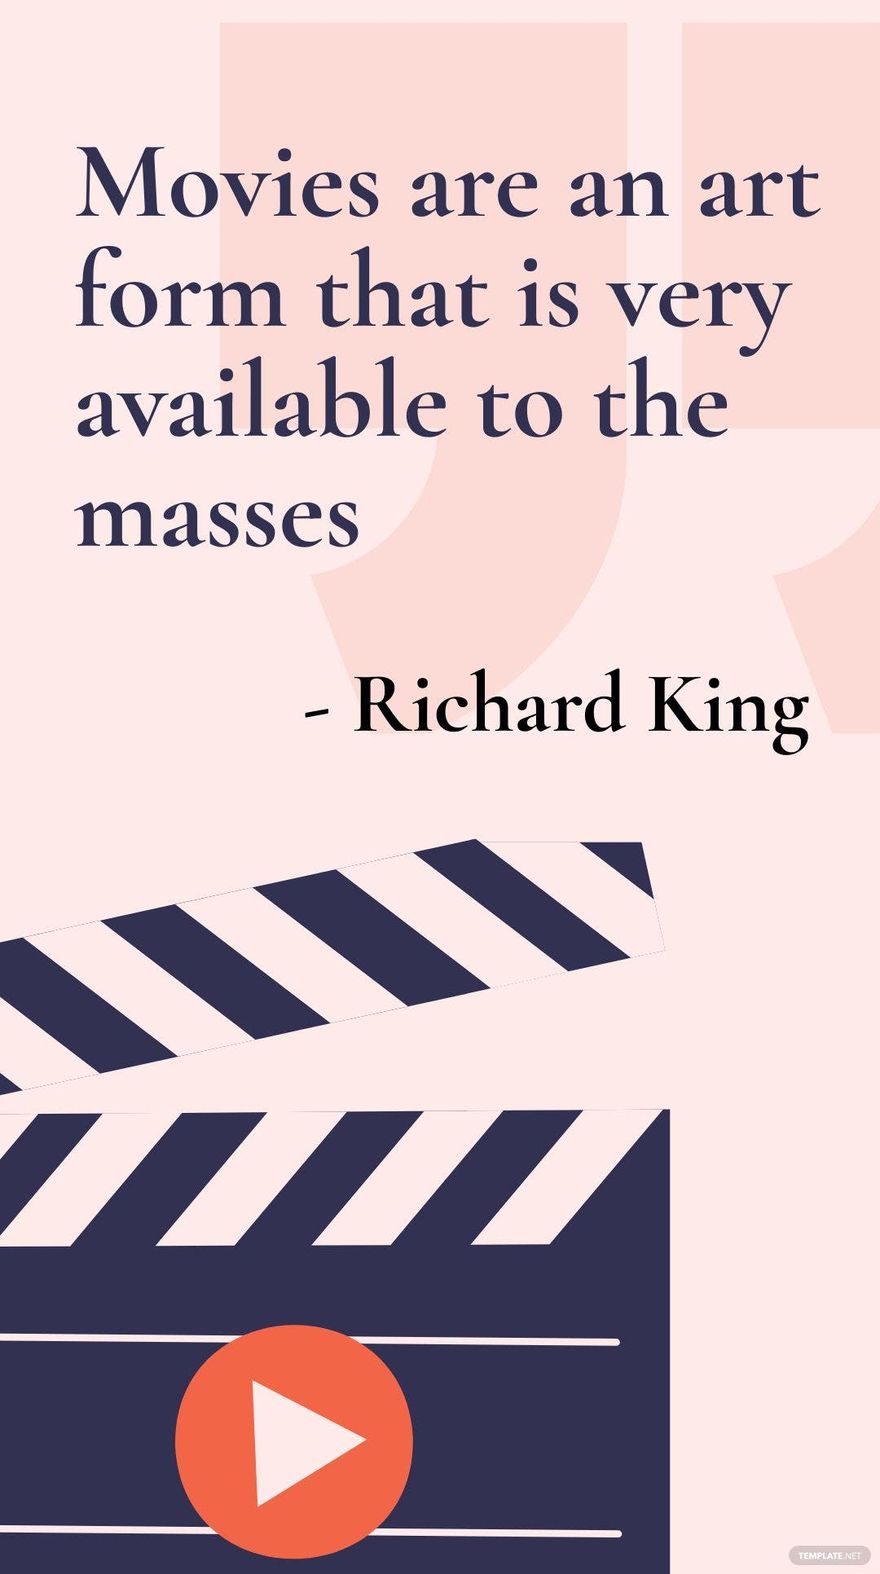 Richard King - Movies are an art form that is very available to the masses